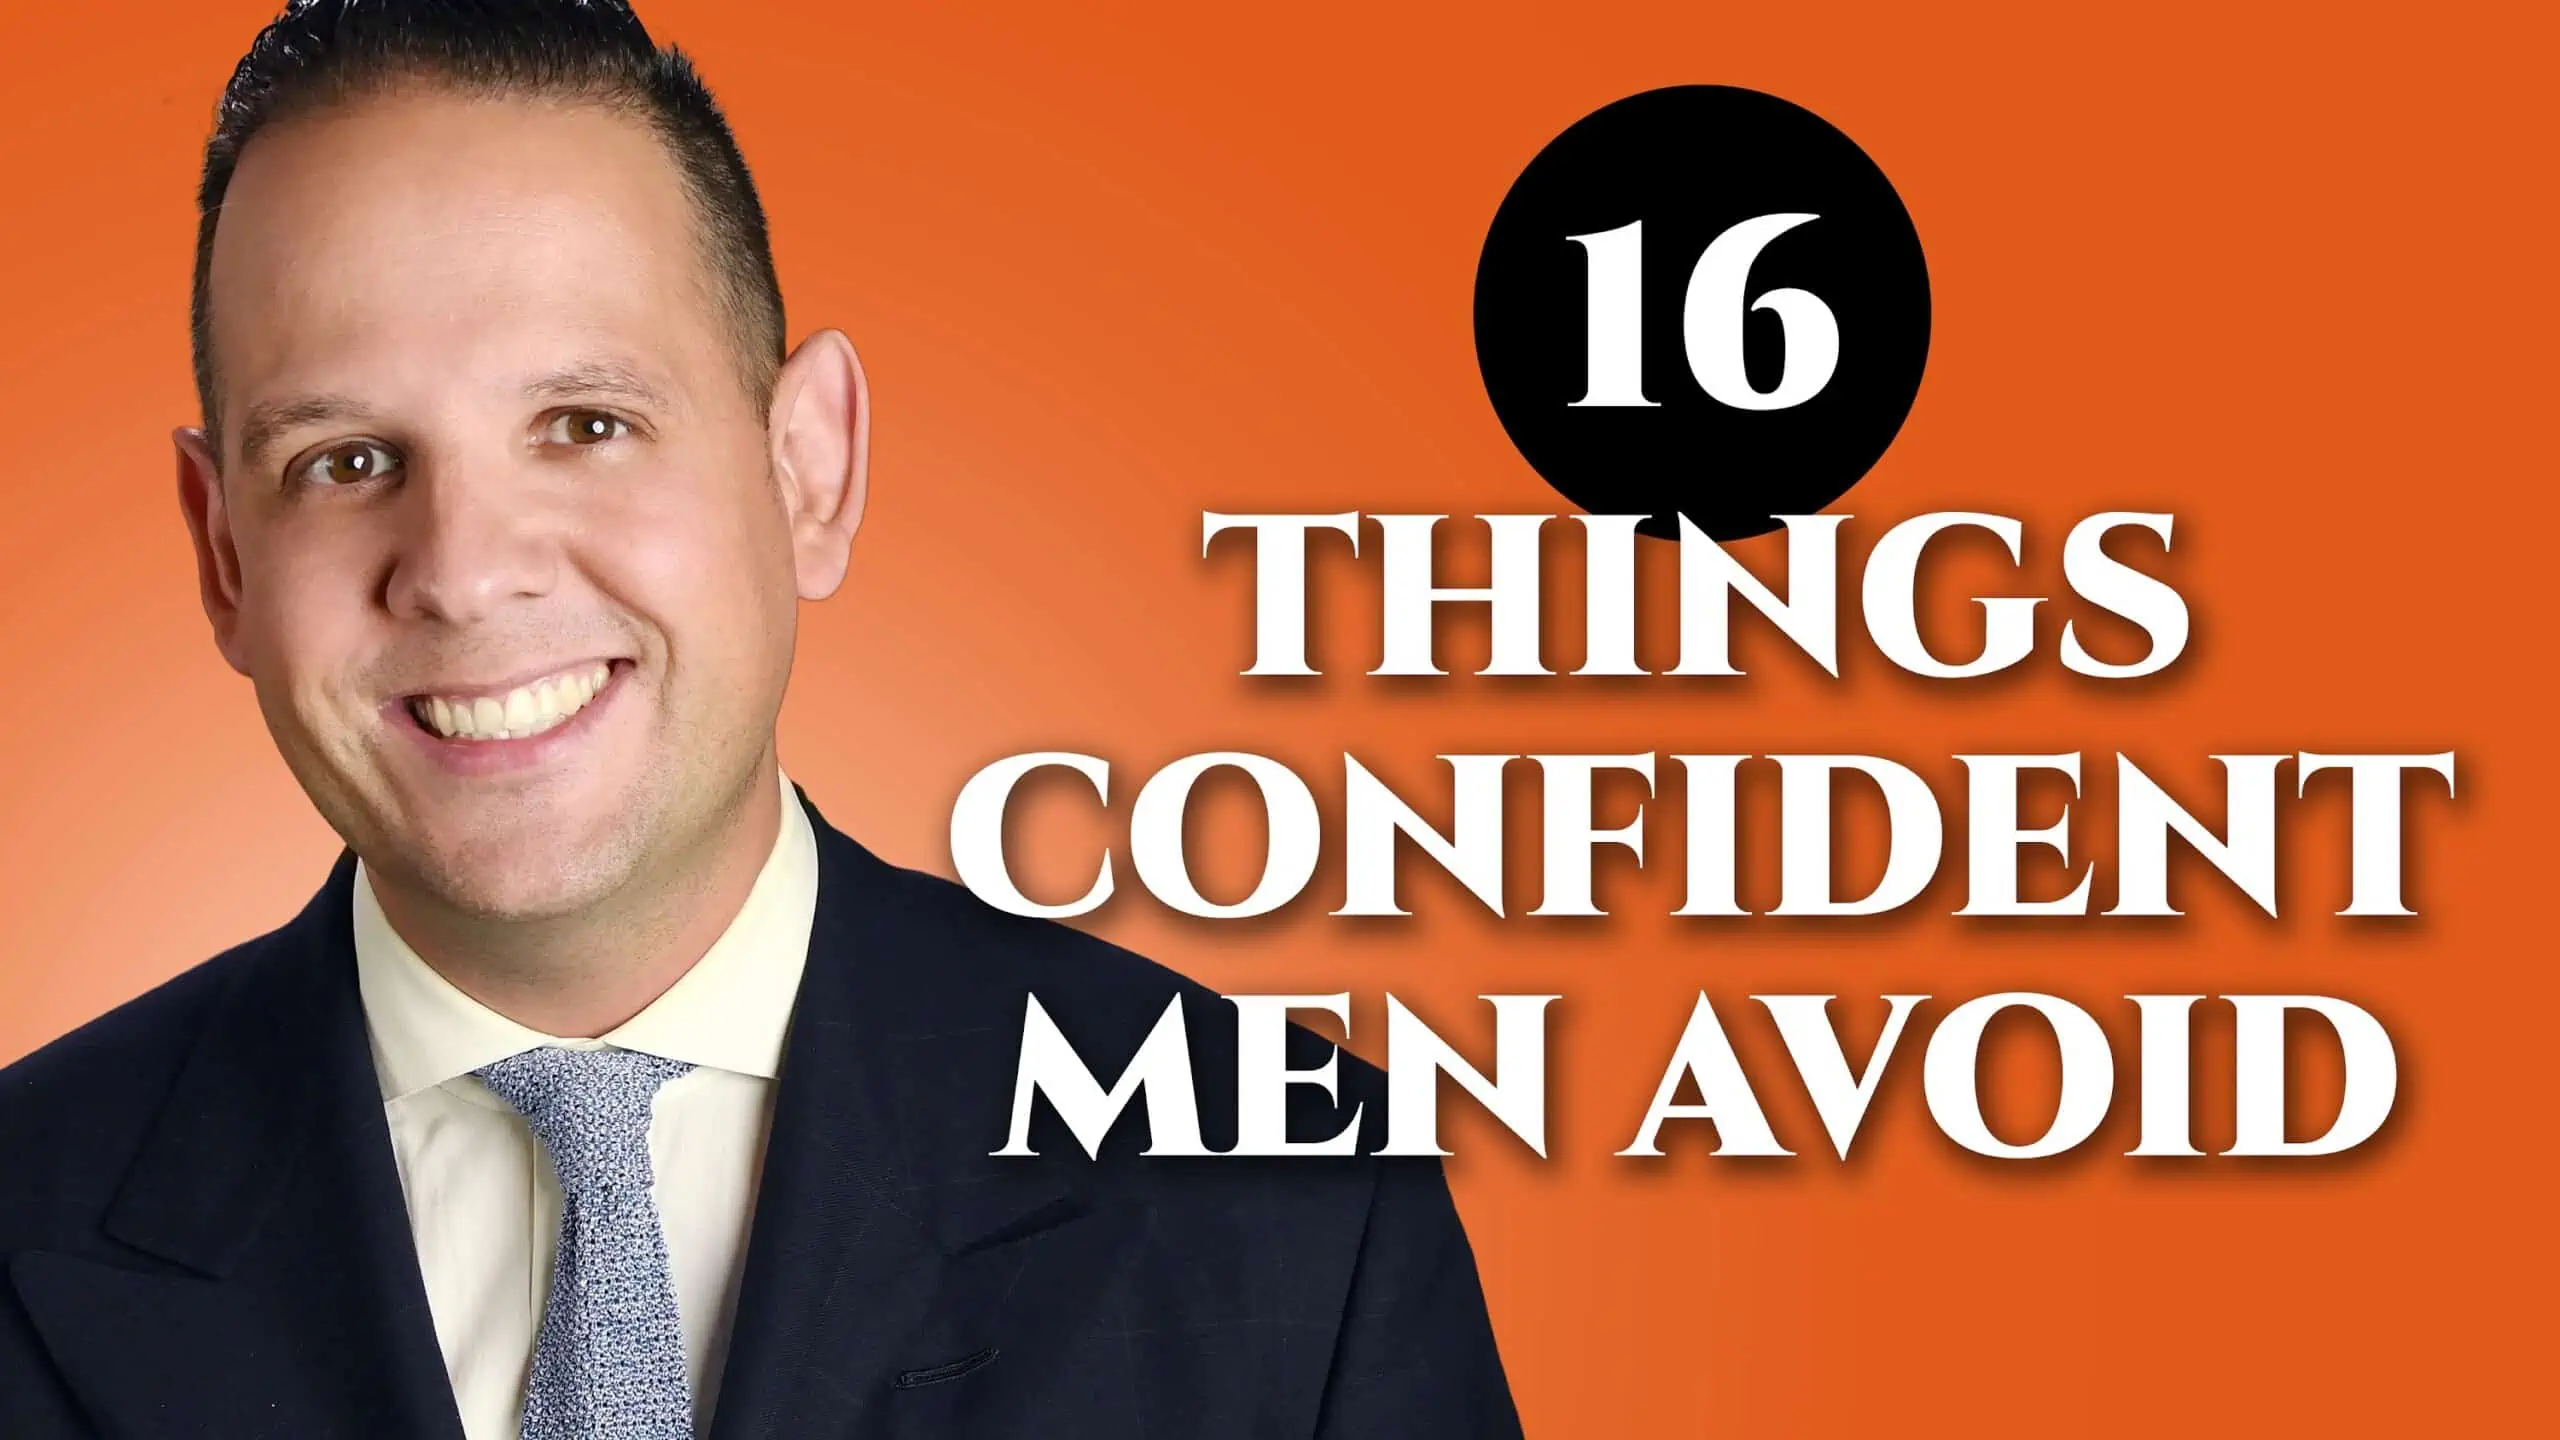 16 things confident men avoid 3840x2160 scaled